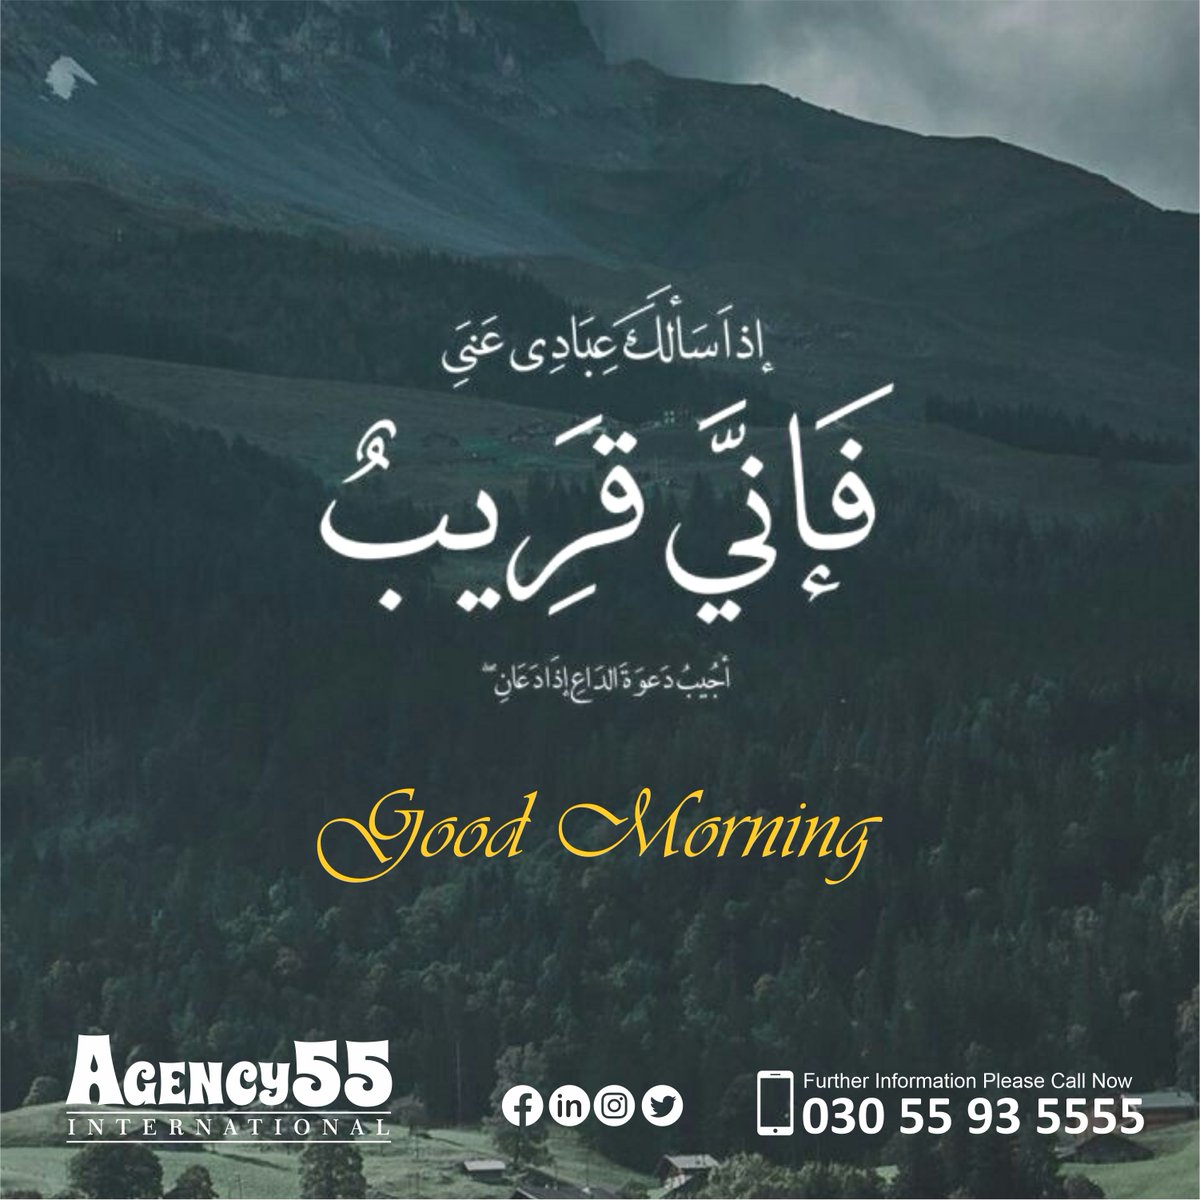 Welcome to this beautiful morning with a smile on your face. I hope you have a great time and day today. Wishing you a very good morning!
#Agency55 #GoodMorning #Qoutes #QuranicQuotes
 #TayyabaRaja #TrainAccident #SanamJavedKhan  #TikTok